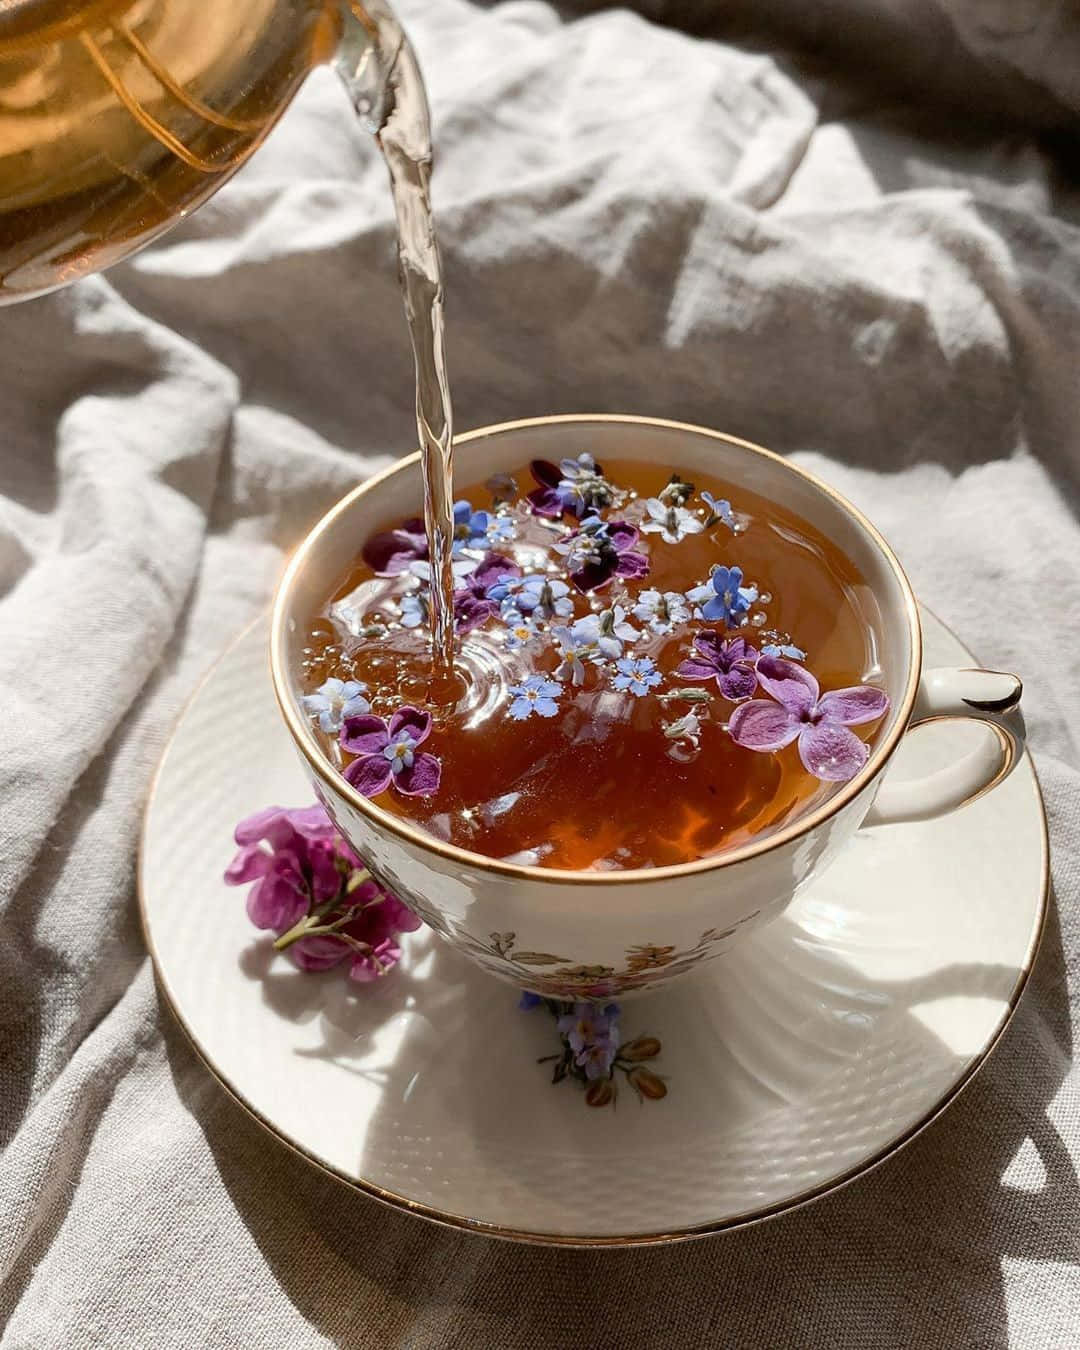 A Cup Of Tea With Flowers Being Poured Into It